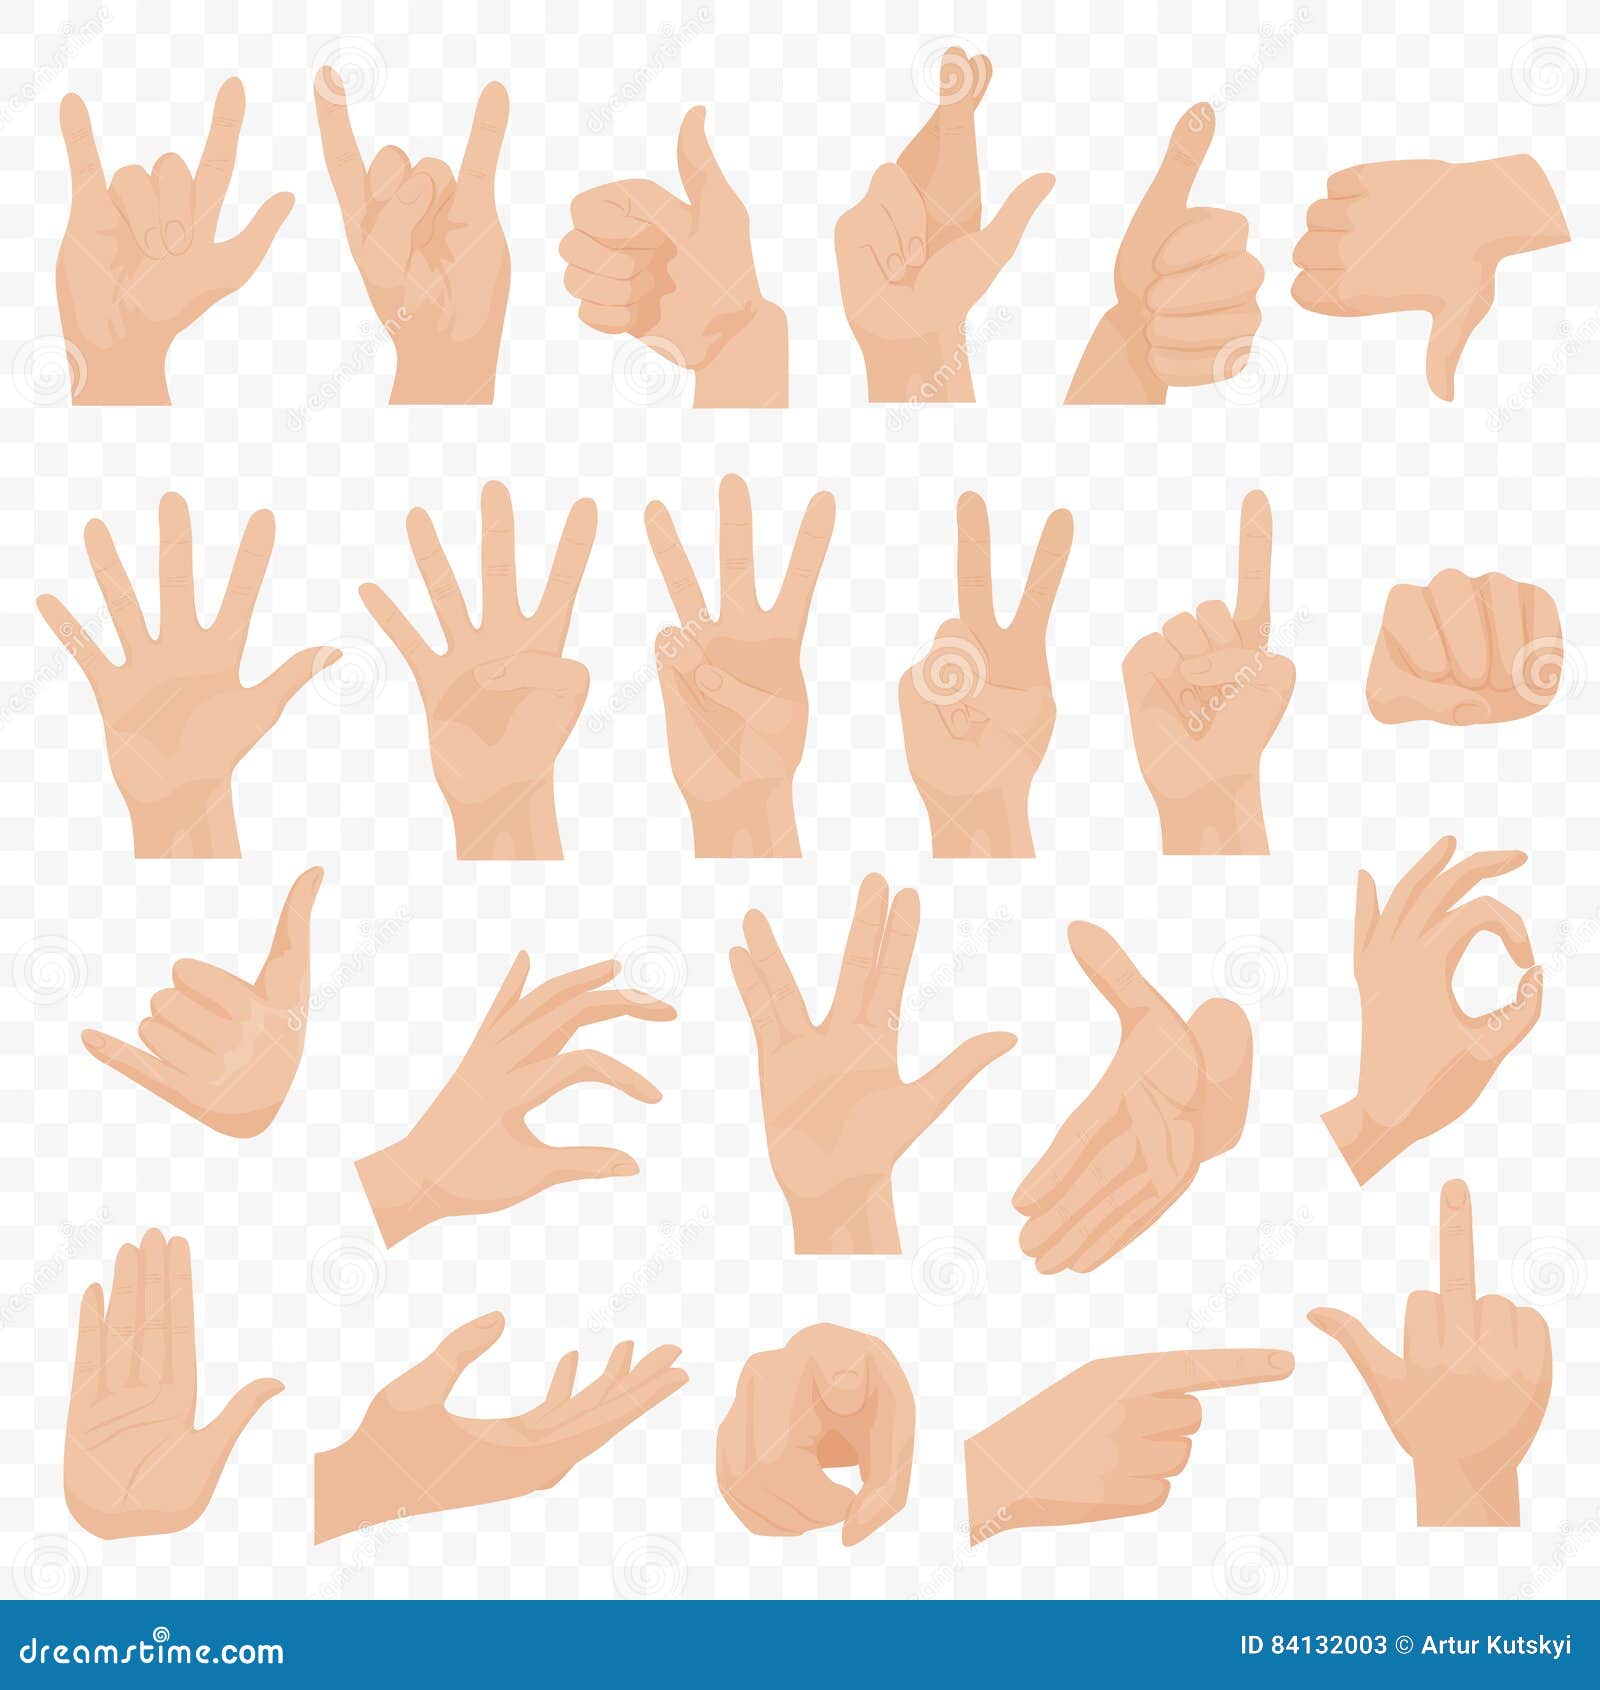 realistic human hands icons and s set. emoji hand icons. different gestures, hands, signals and signs emotions